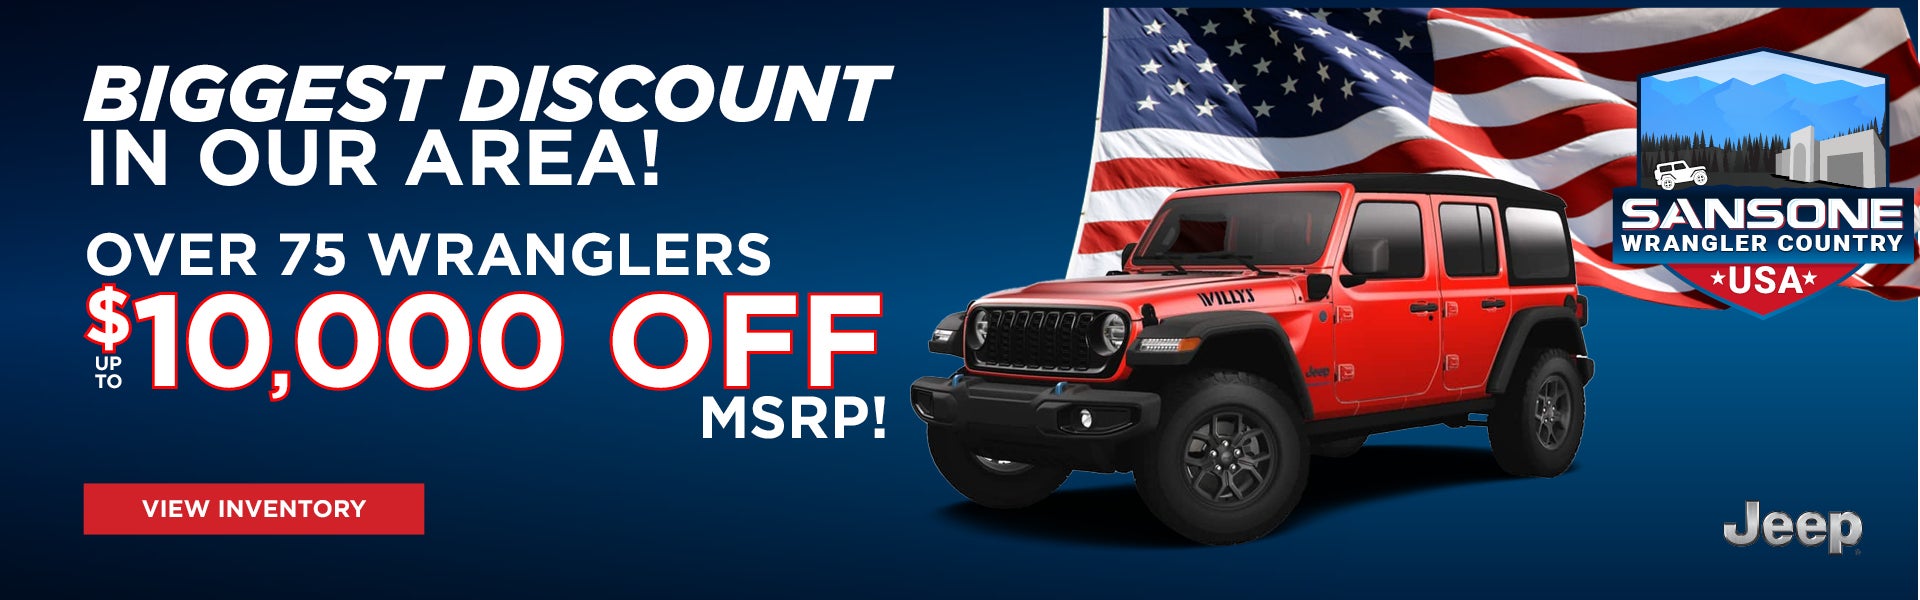 Over 75 Wranglers $10,000 Off MSRP